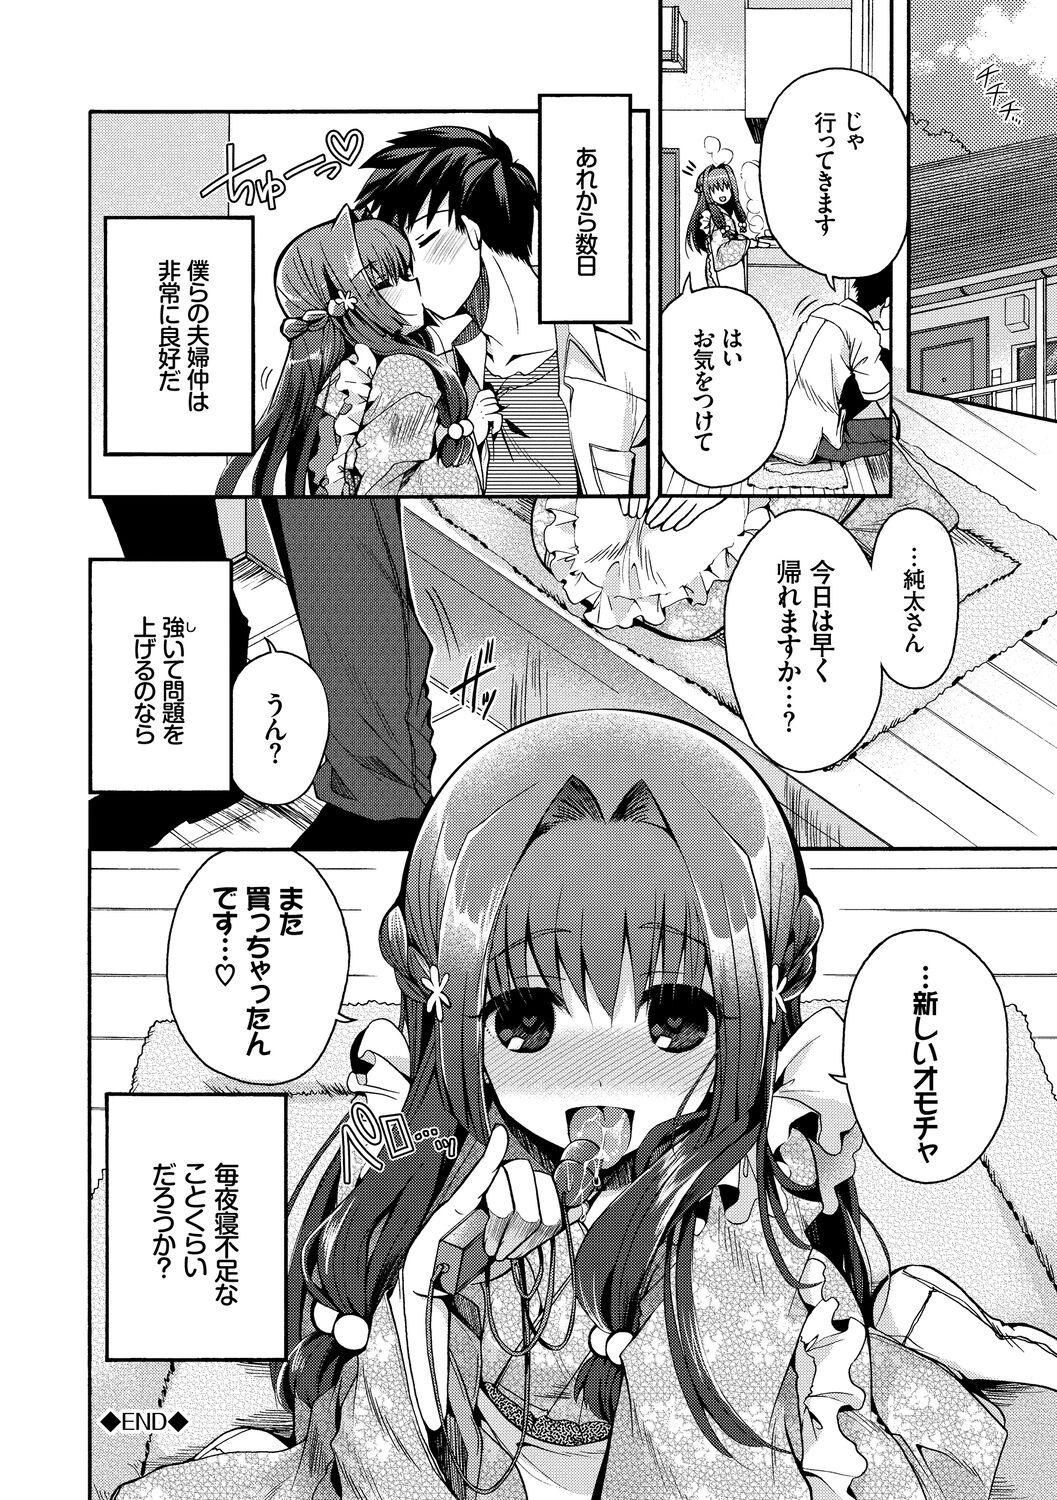 Hatsukoi Melty - Melty First Love 189